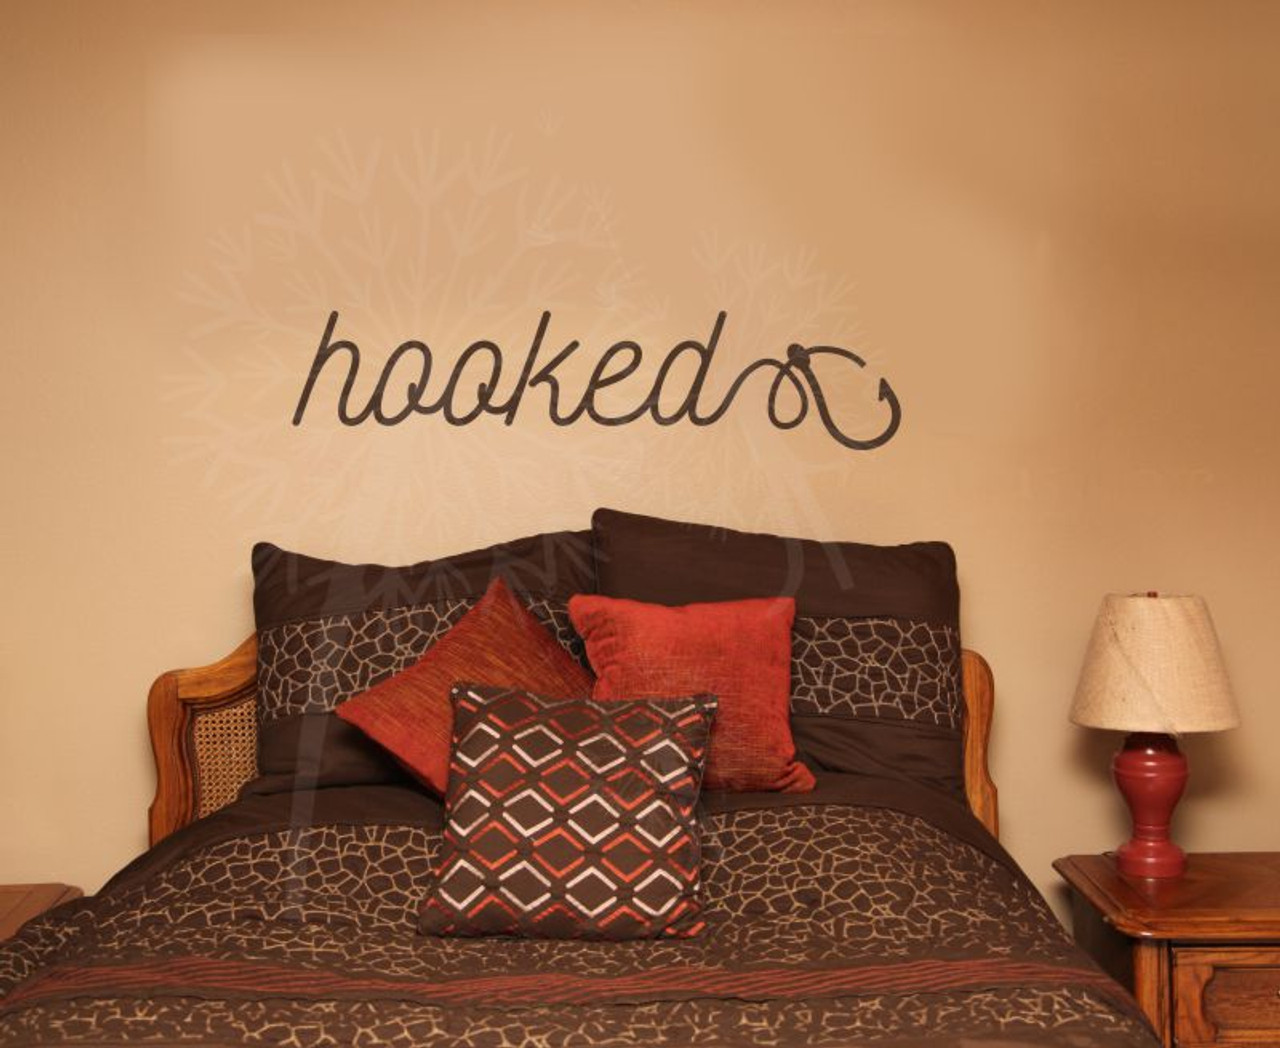 Hooked Cursive Lettering with Fish Hook Fisherman Wall Art Decals